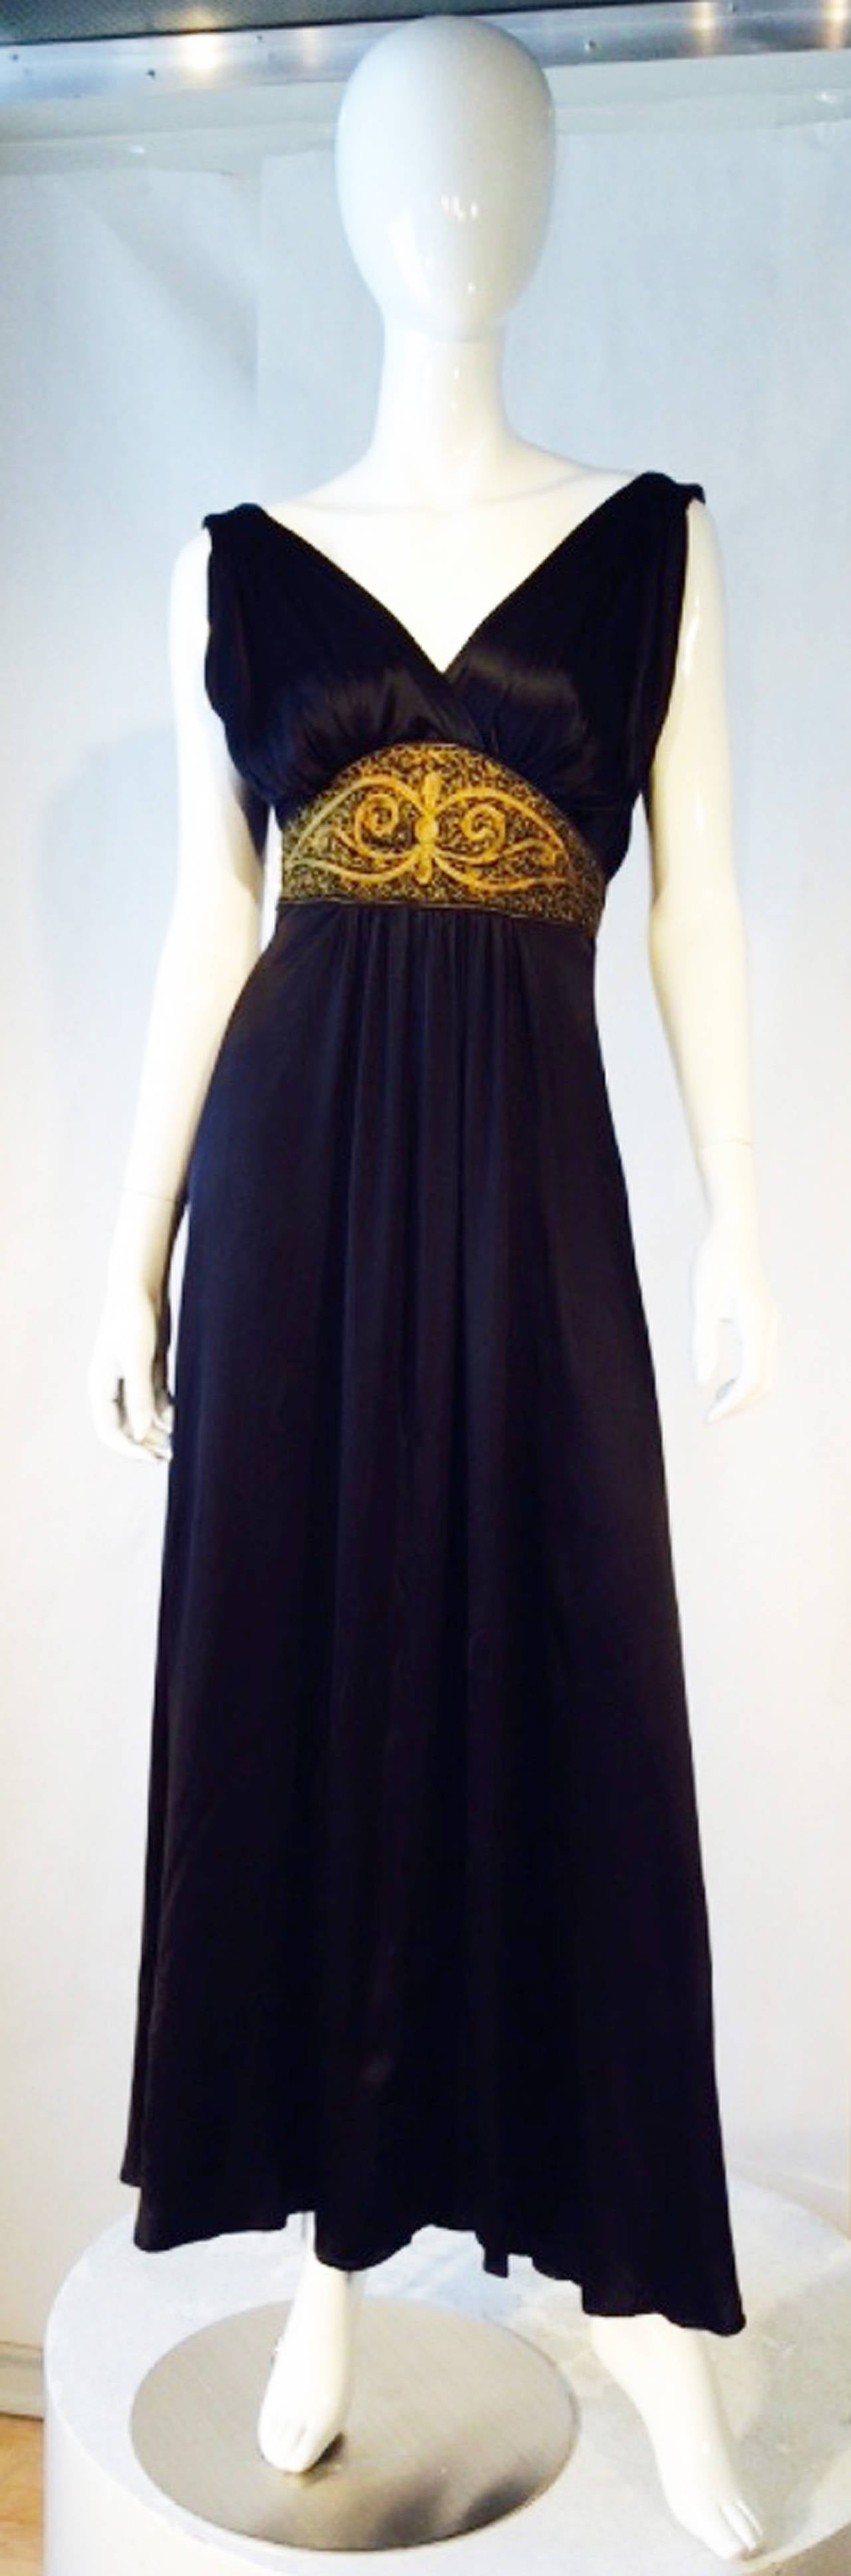 A fine silk gown with a embroidered waistband. Unlabeled jet black silk satin item features a hand embroidered waistband in a metallic gold wire. Bias cut item additionally pleated center front and shoulders. Gown buttons up back with a full sweep.